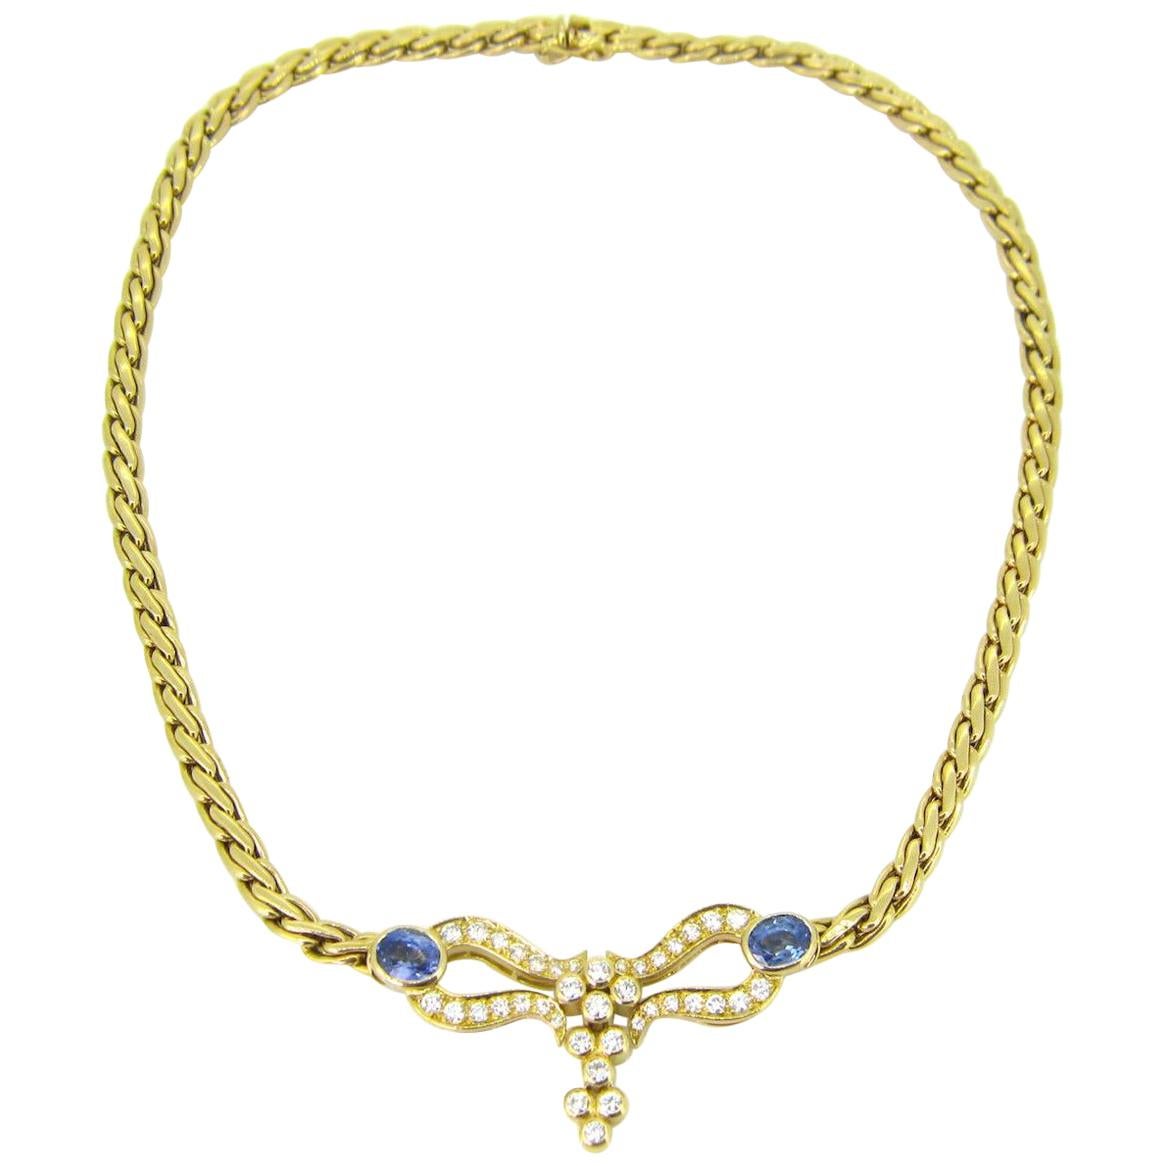 Ceylon Sapphires and Diamonds Necklace, 18kt Yellow Gold, France